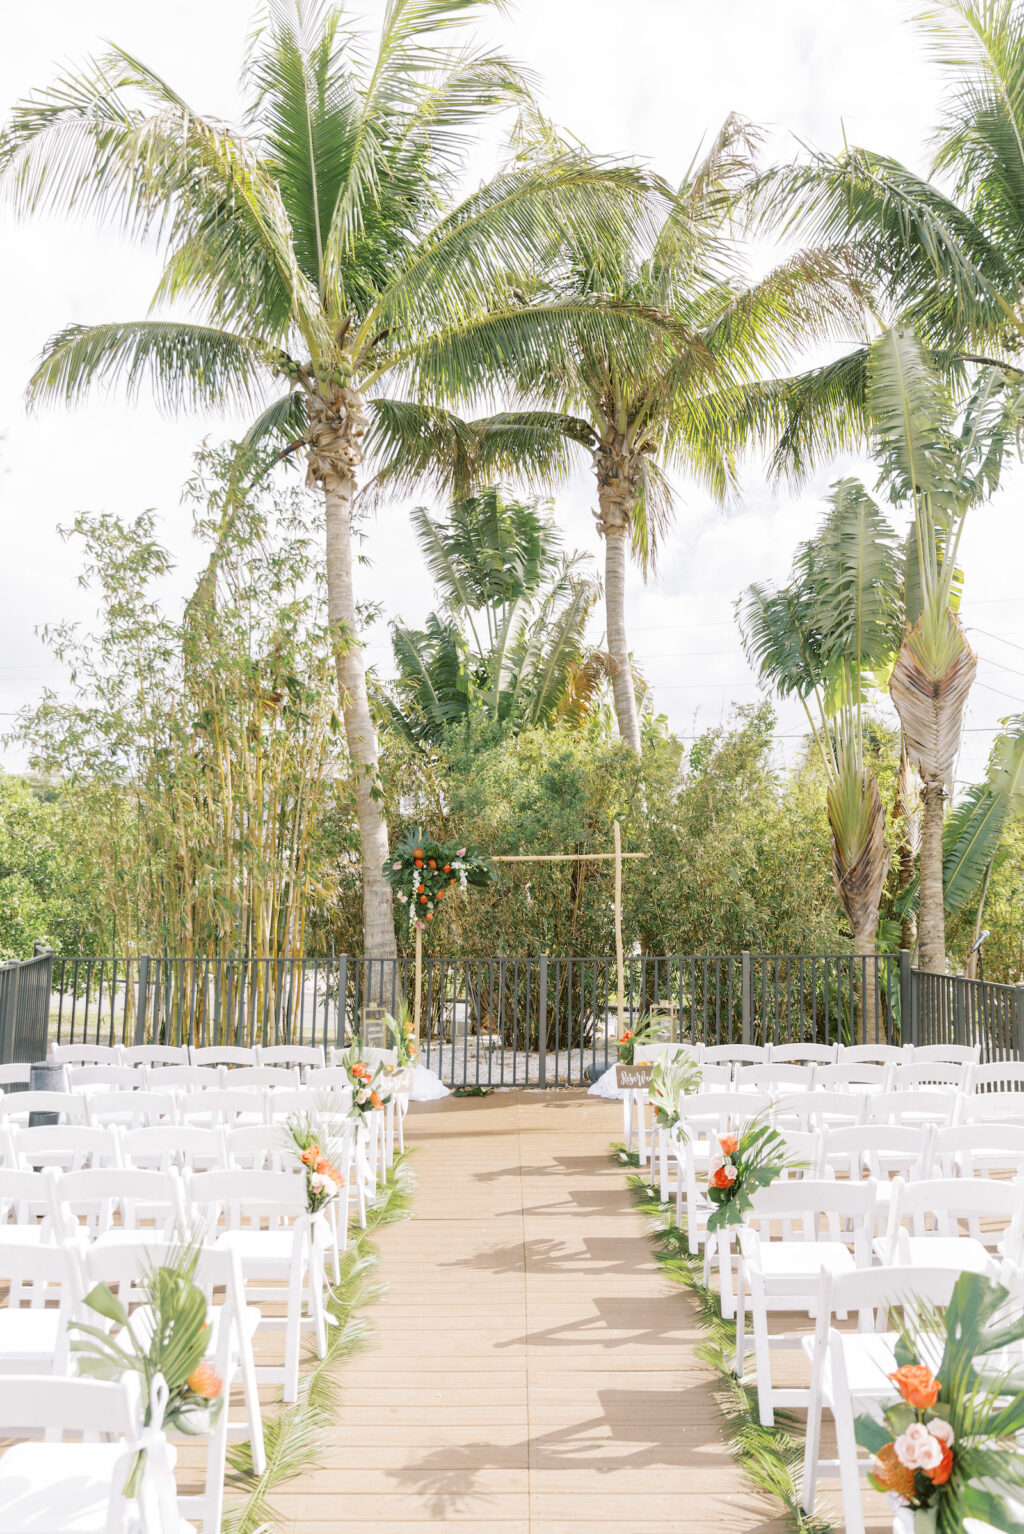 Tropical Pink and Green Outdoor Courtyard Wedding Ceremony Decor, Monstera Palm Leaves with Orange and Pink Flowers, Bamboo Arch | Tampa Bay Wedding Planner Coastal Coordinating | St. Pete Wedding Venue Hotel Zamora